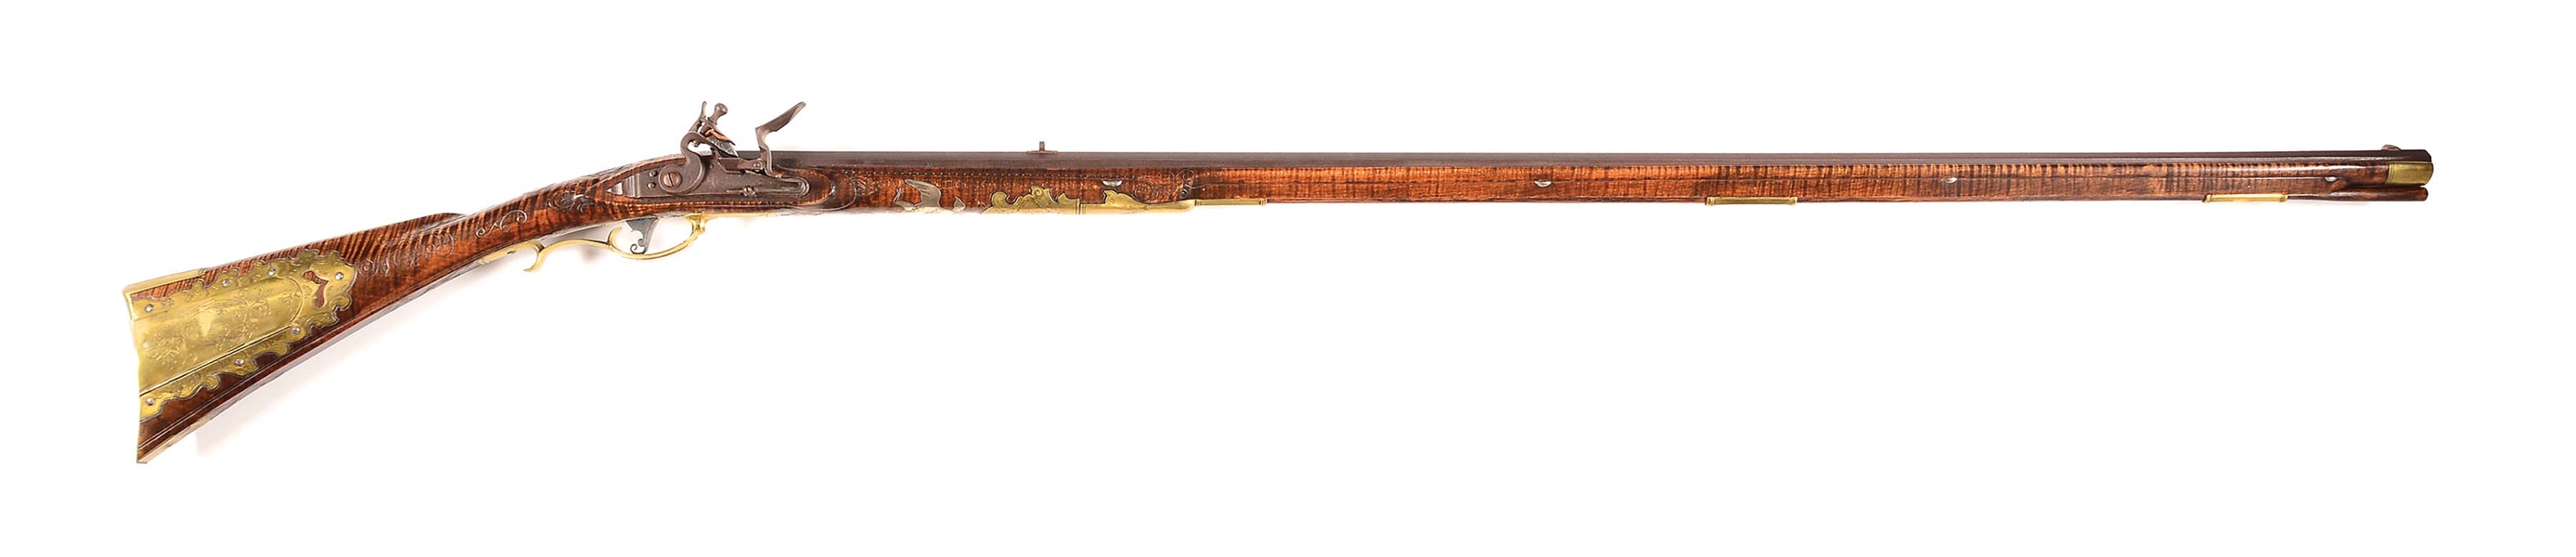 (A) EXQUISITE CONTEMPORARY KENTUCKY RIFLE BY W. WATSON.